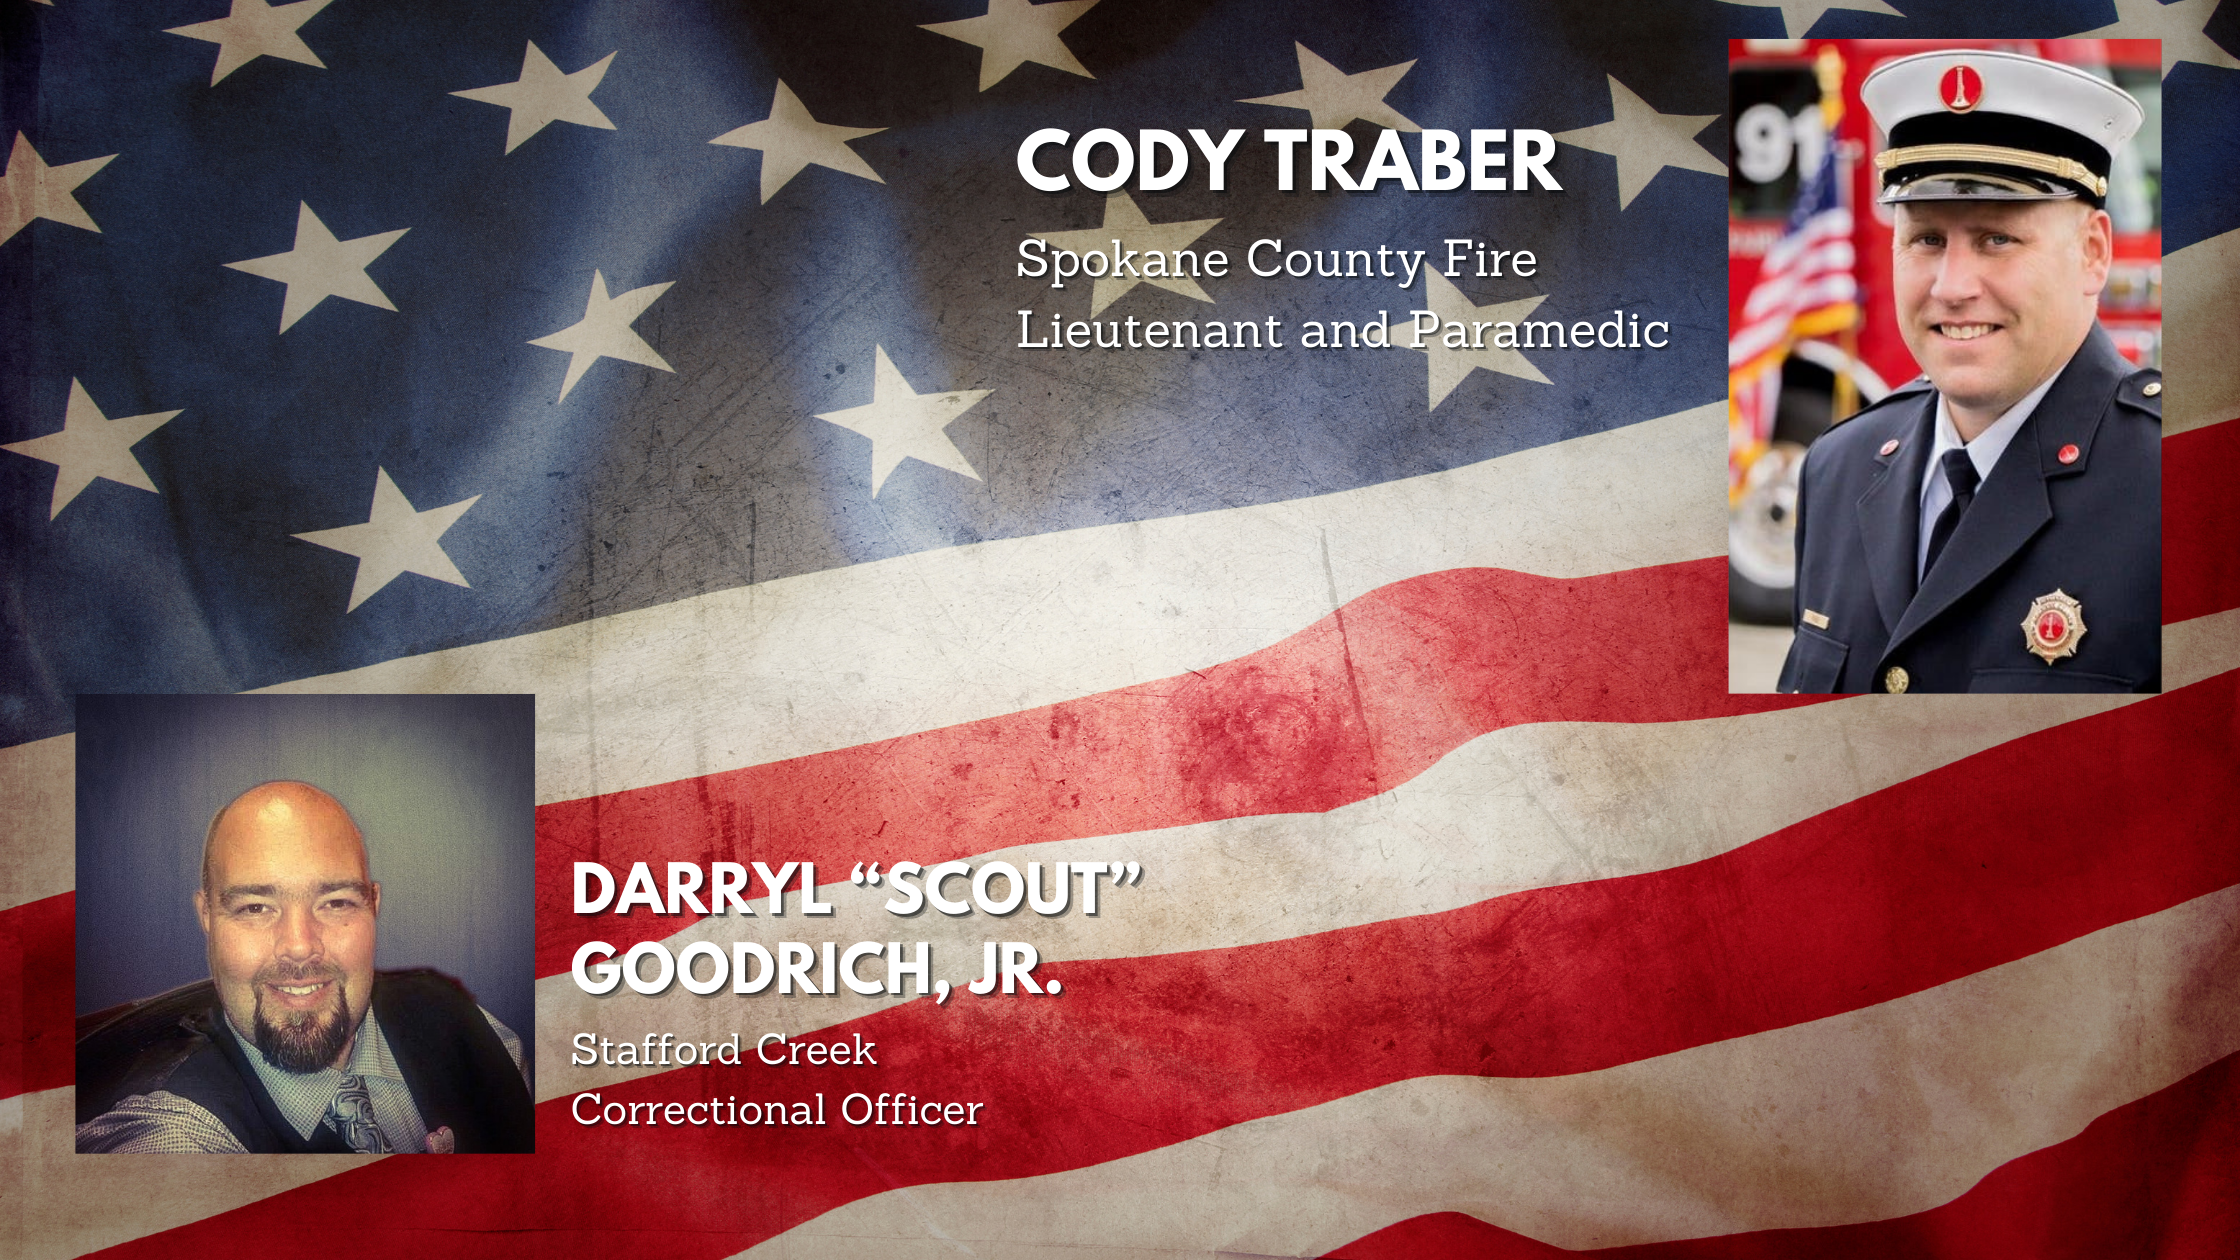 Header photo graphic of an American flag with overlay photos of two men, one is a formal firefighter's uniform, the other in a vest and tie.